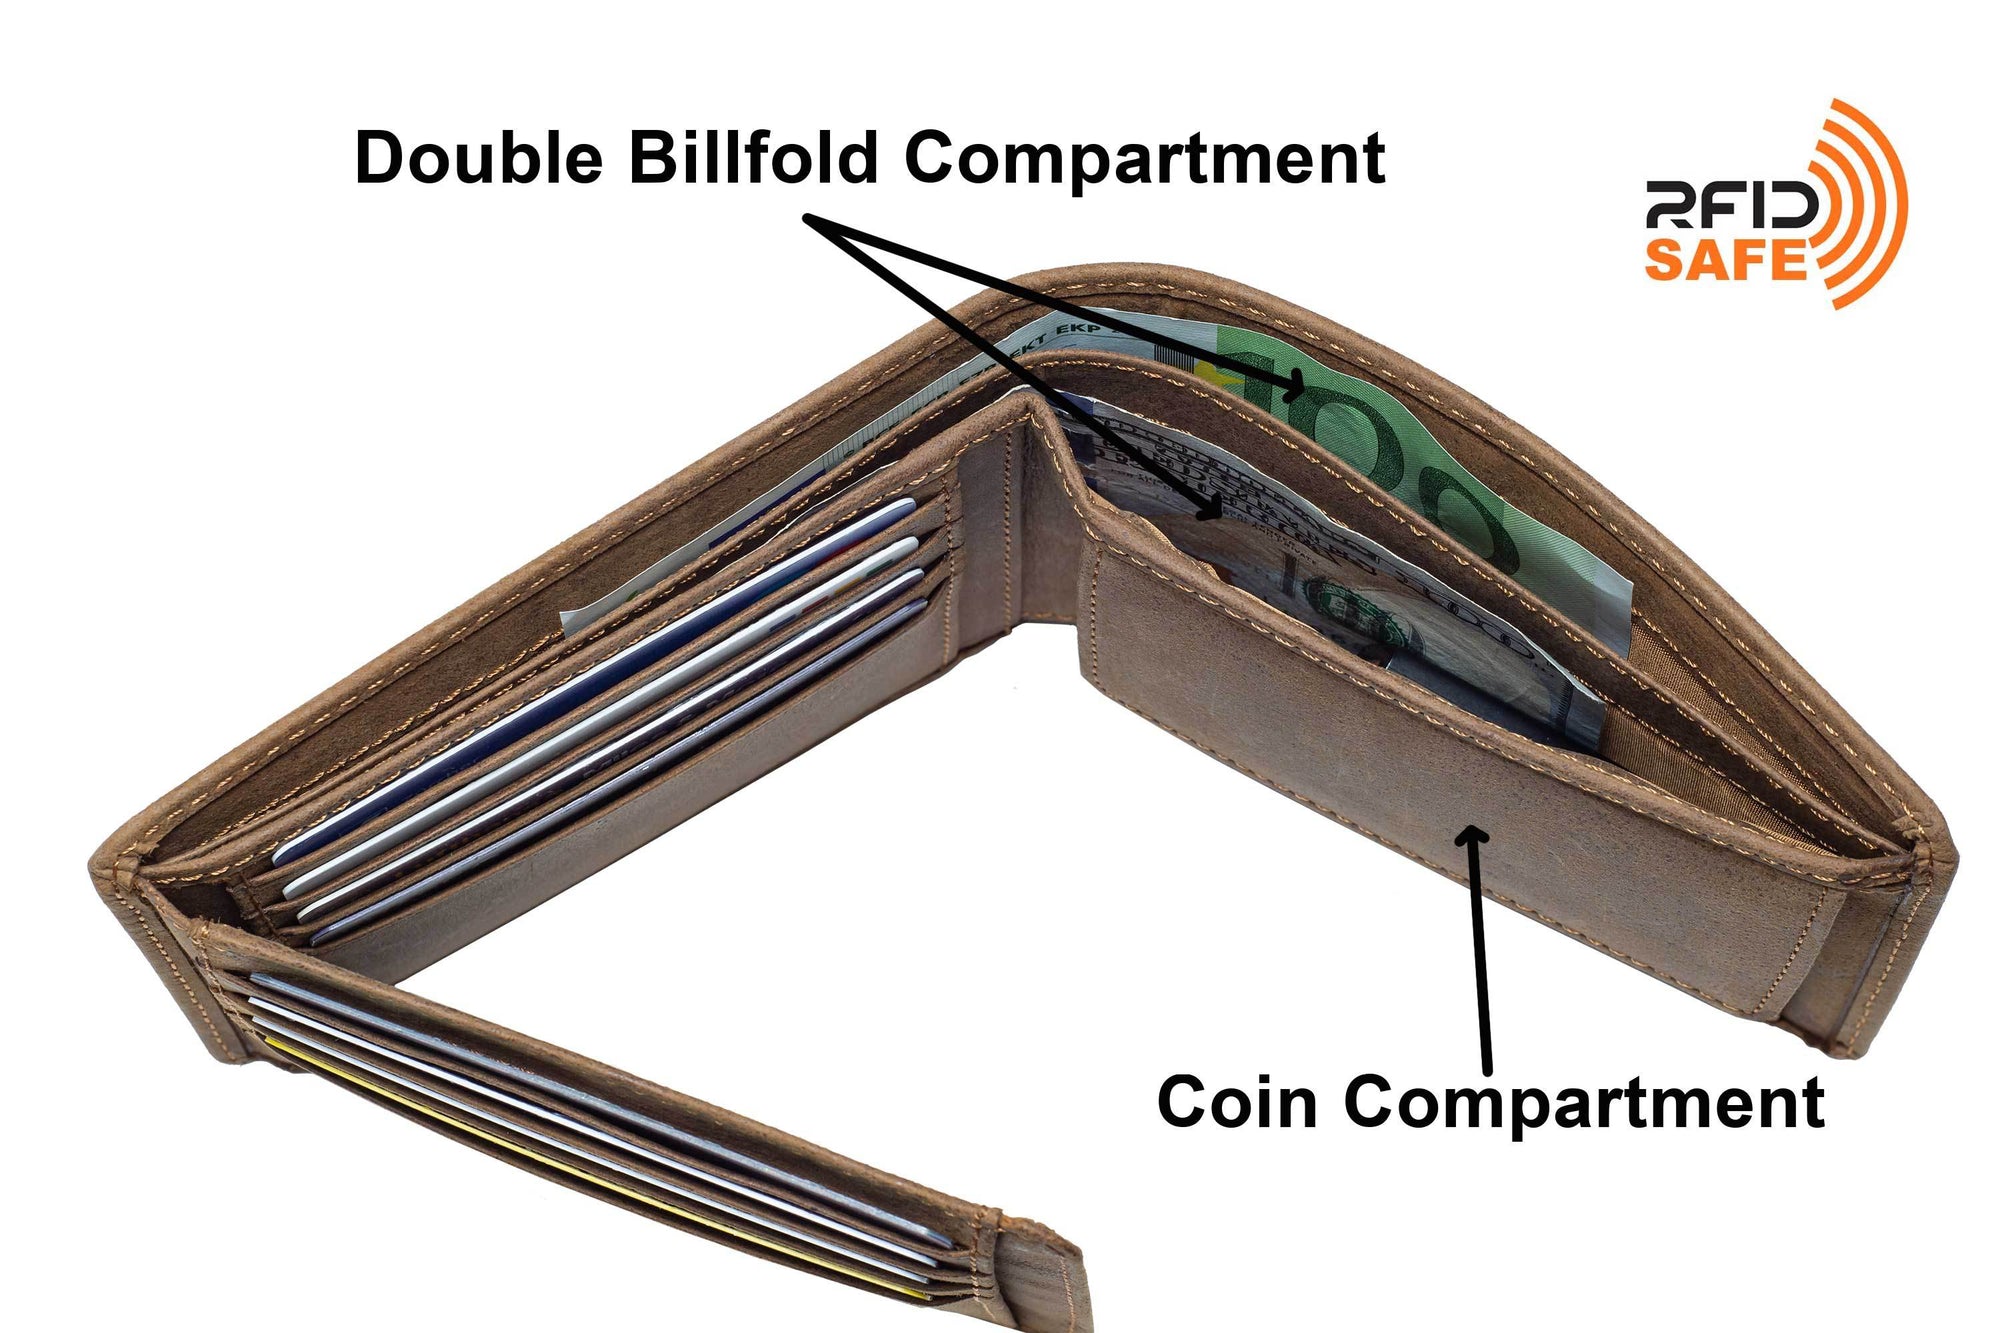 DiLoro Men's Leather Bifold Wallet with Flip ID, Coin Wallet and RFID Blocking Technology - fully open, top view showing double billfold and hidden slip pockets of the wallet